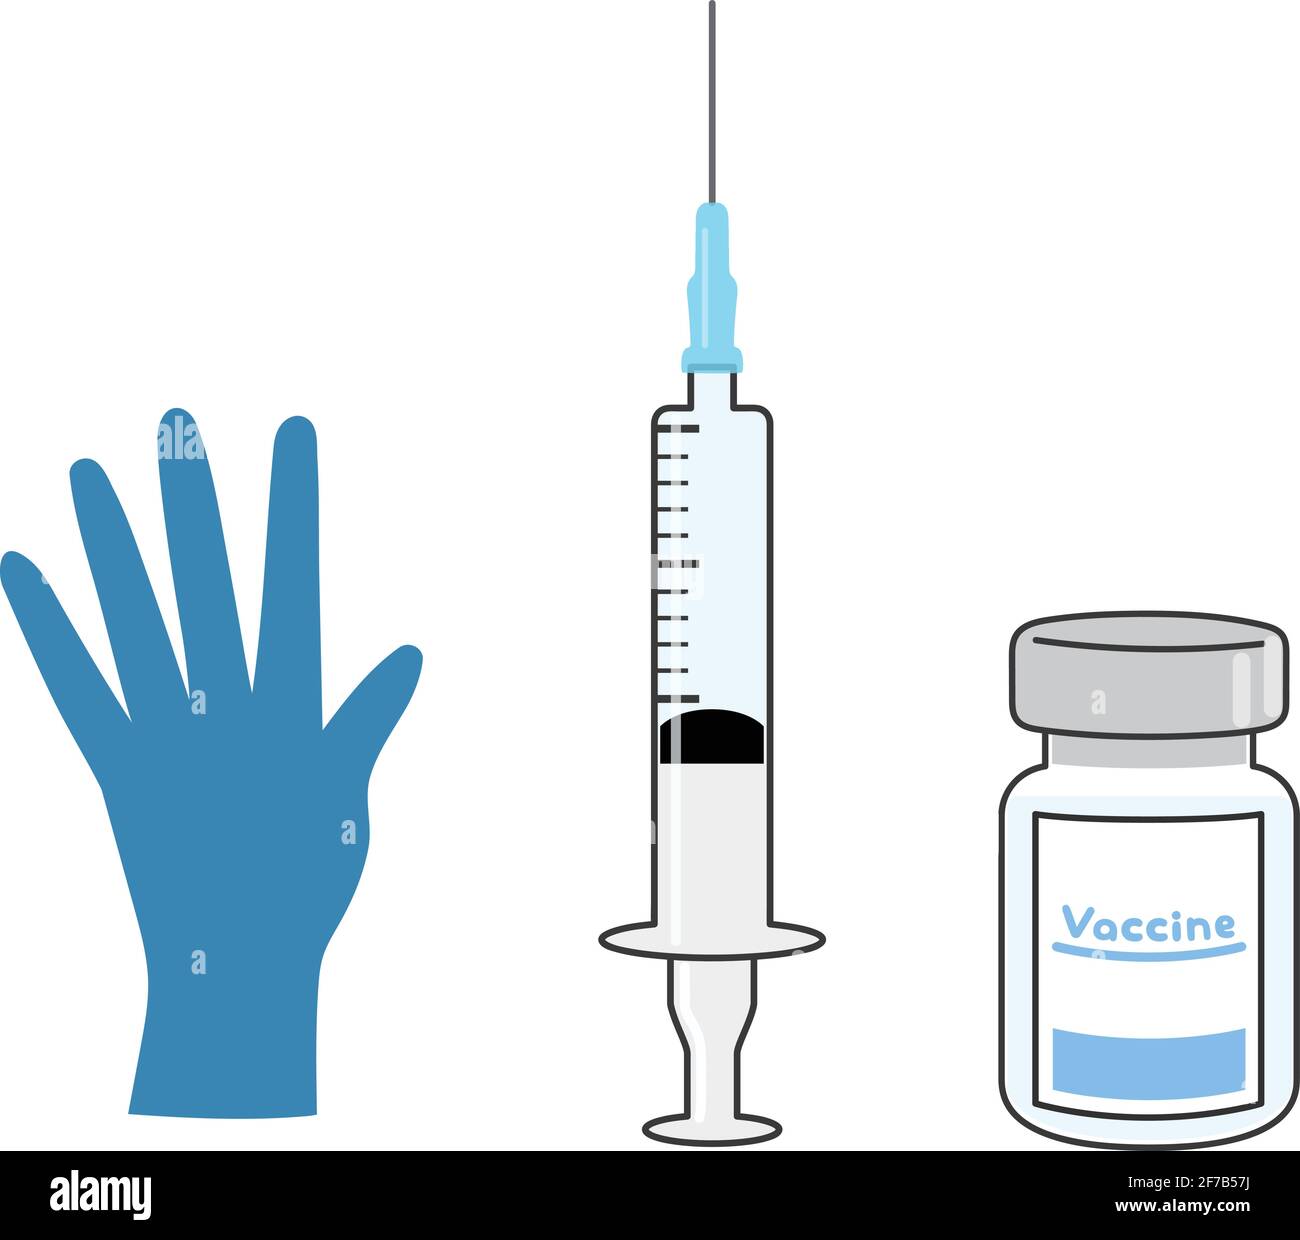 Medical tools for vaccination. Glass vial, syringe with a needle, and a surgical glove. Vector illustration isolated on white background. Stock Vector